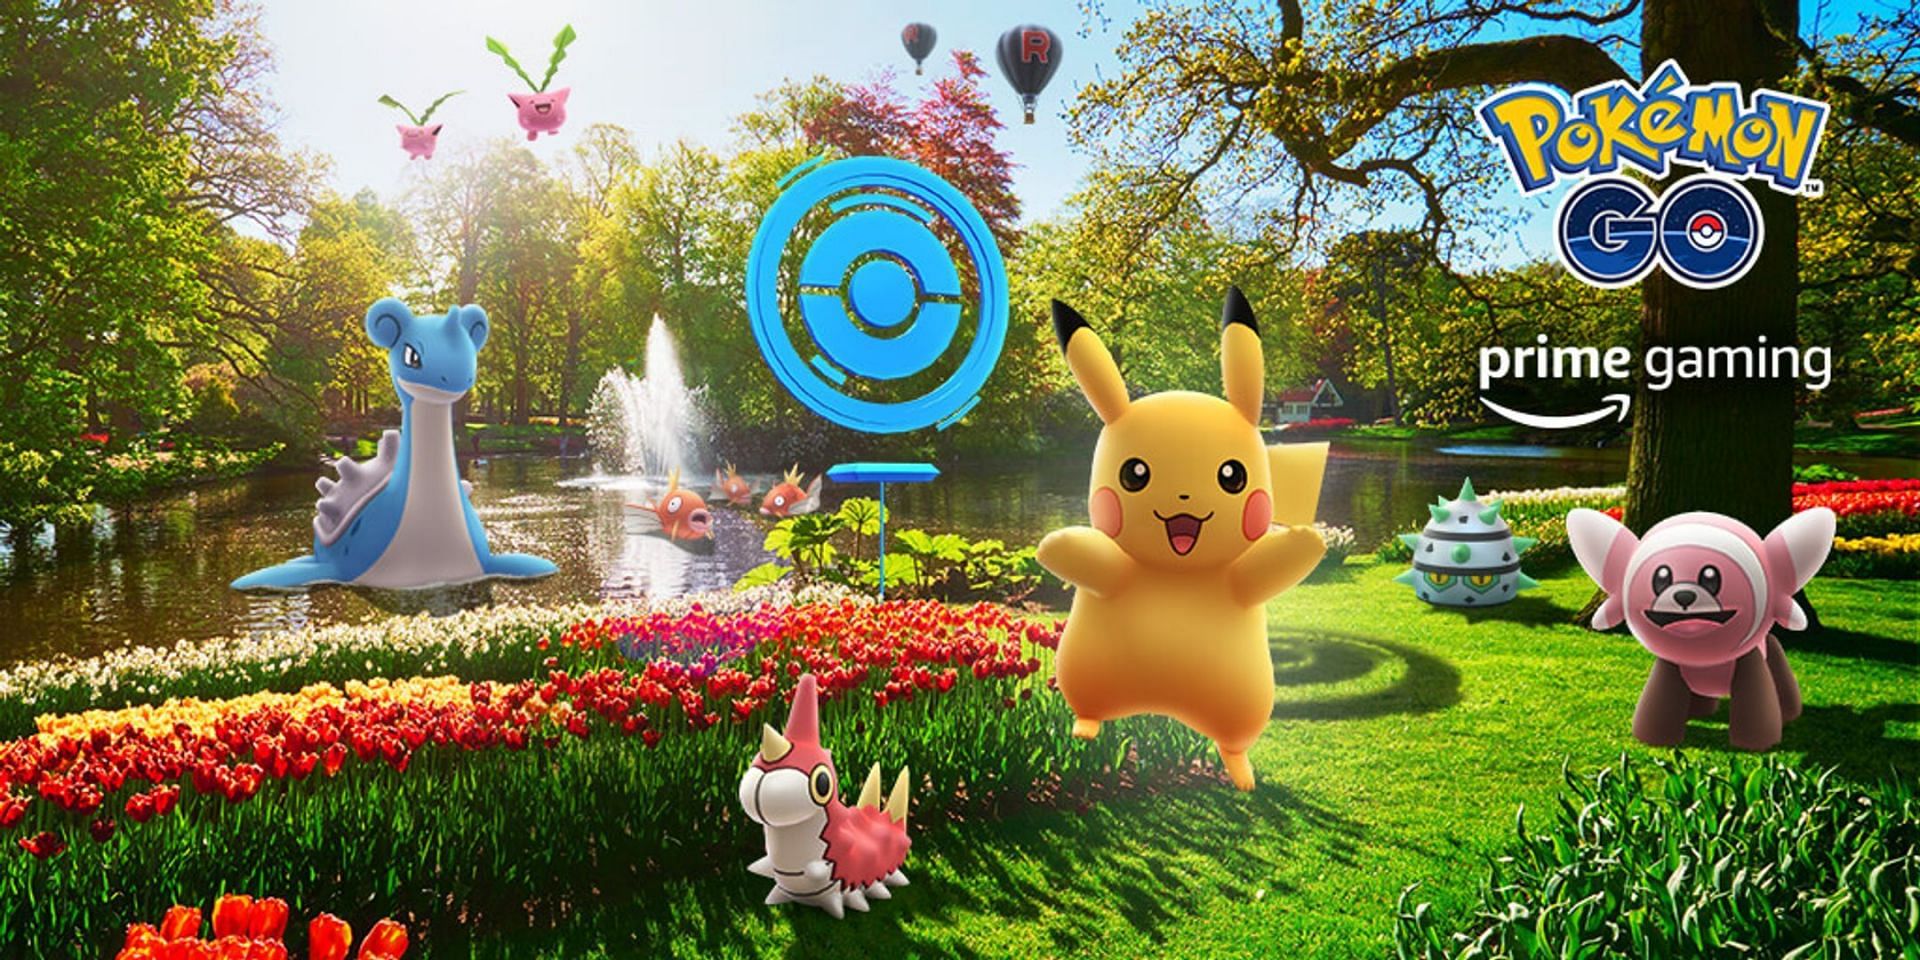 Official artwork announcing the collaboration between Pokemon GO and Prime Gaming (Image via Niantic)